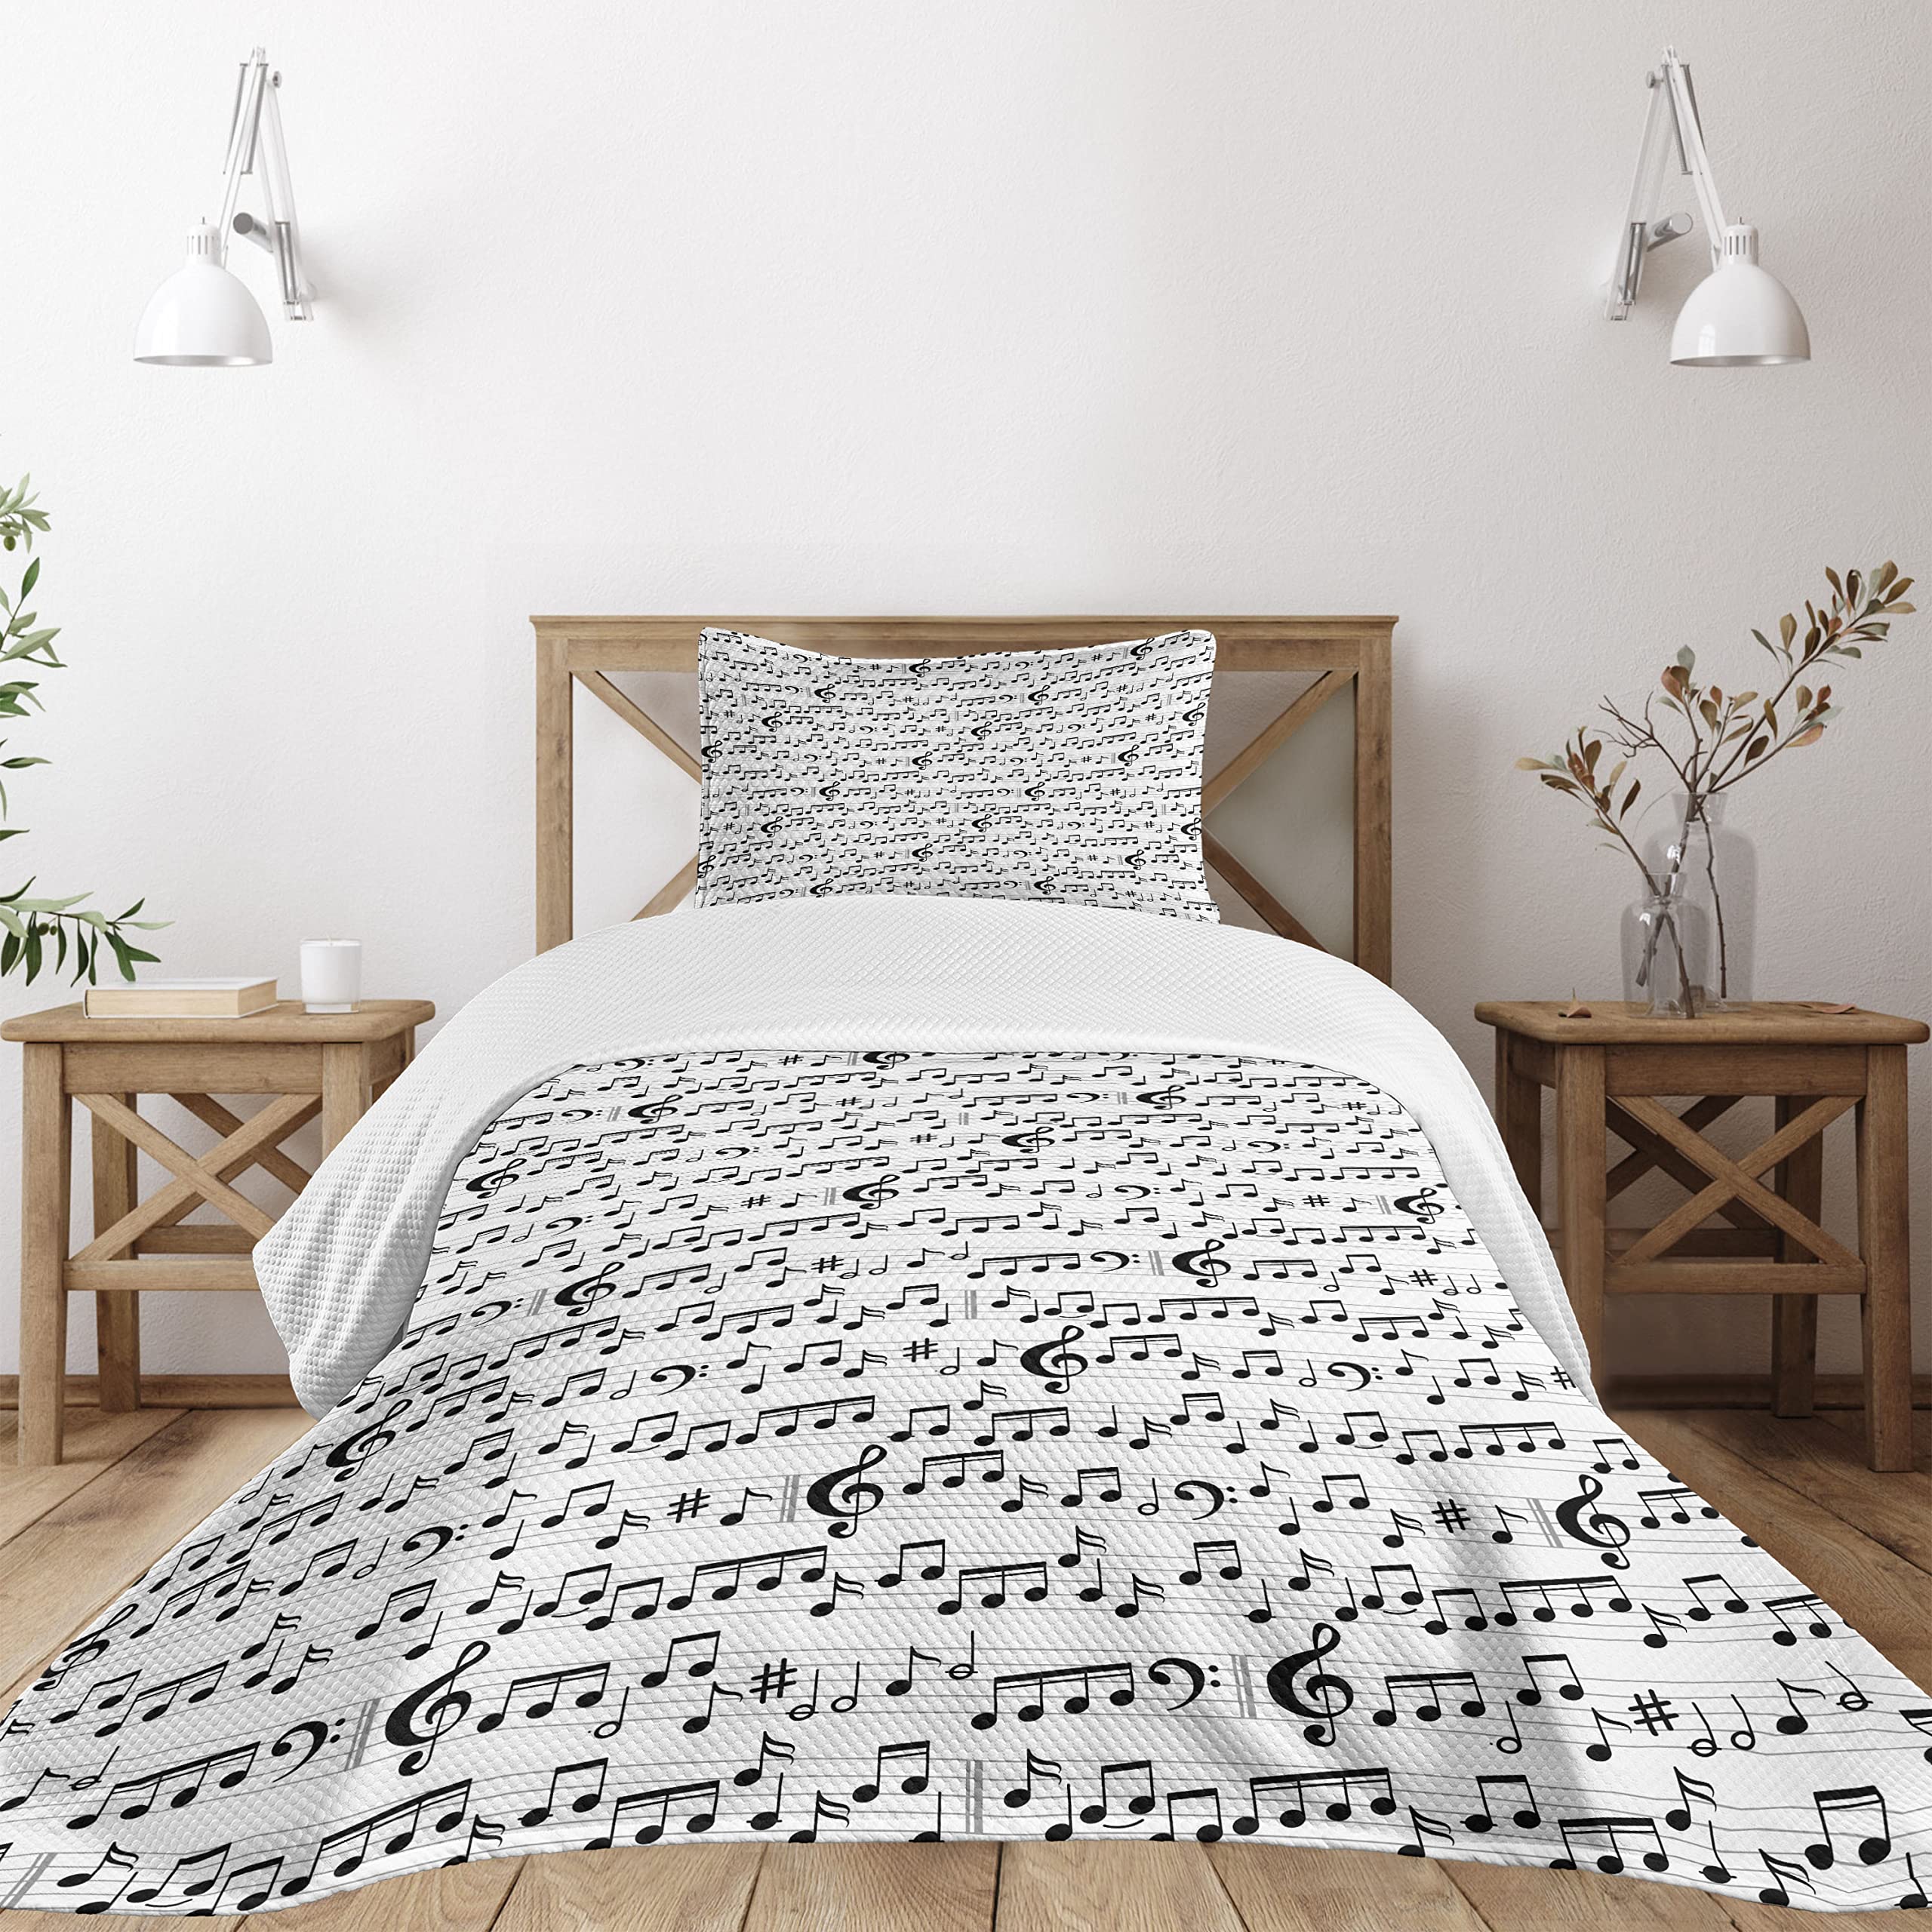 Ambesonne Music Bedspread, Abstract Style Professional Music Pattern with Notes and Clef Sheet Play Writing, Decorative Quilted 2 Piece Coverlet Set with Pillow Sham, Twin Size, White Dark Grey